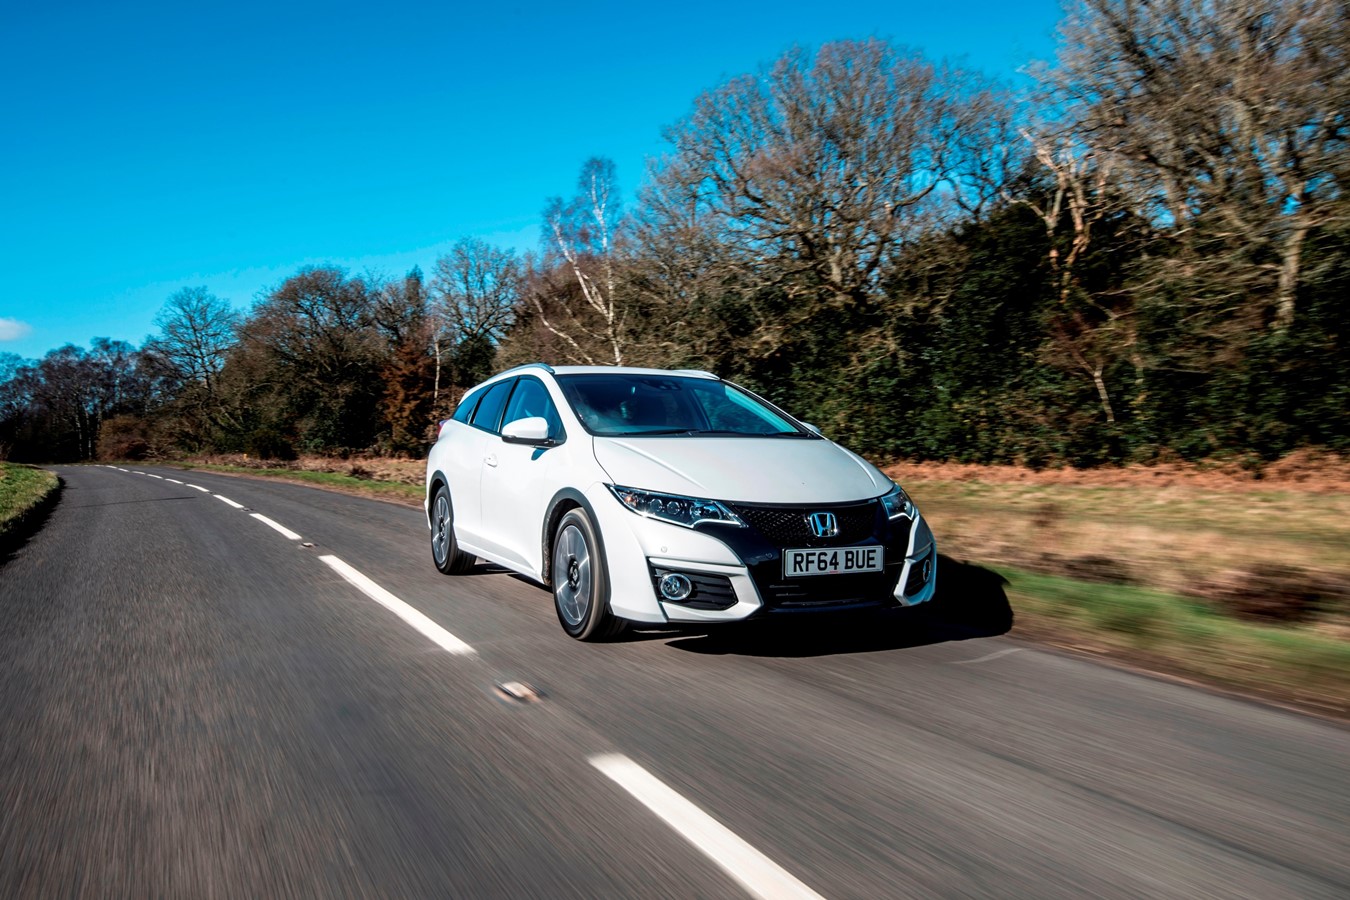 Honda targets new GUINNESS WORLD RECORDS™ title for fuel efficiency with 8,500mile drive across Europe